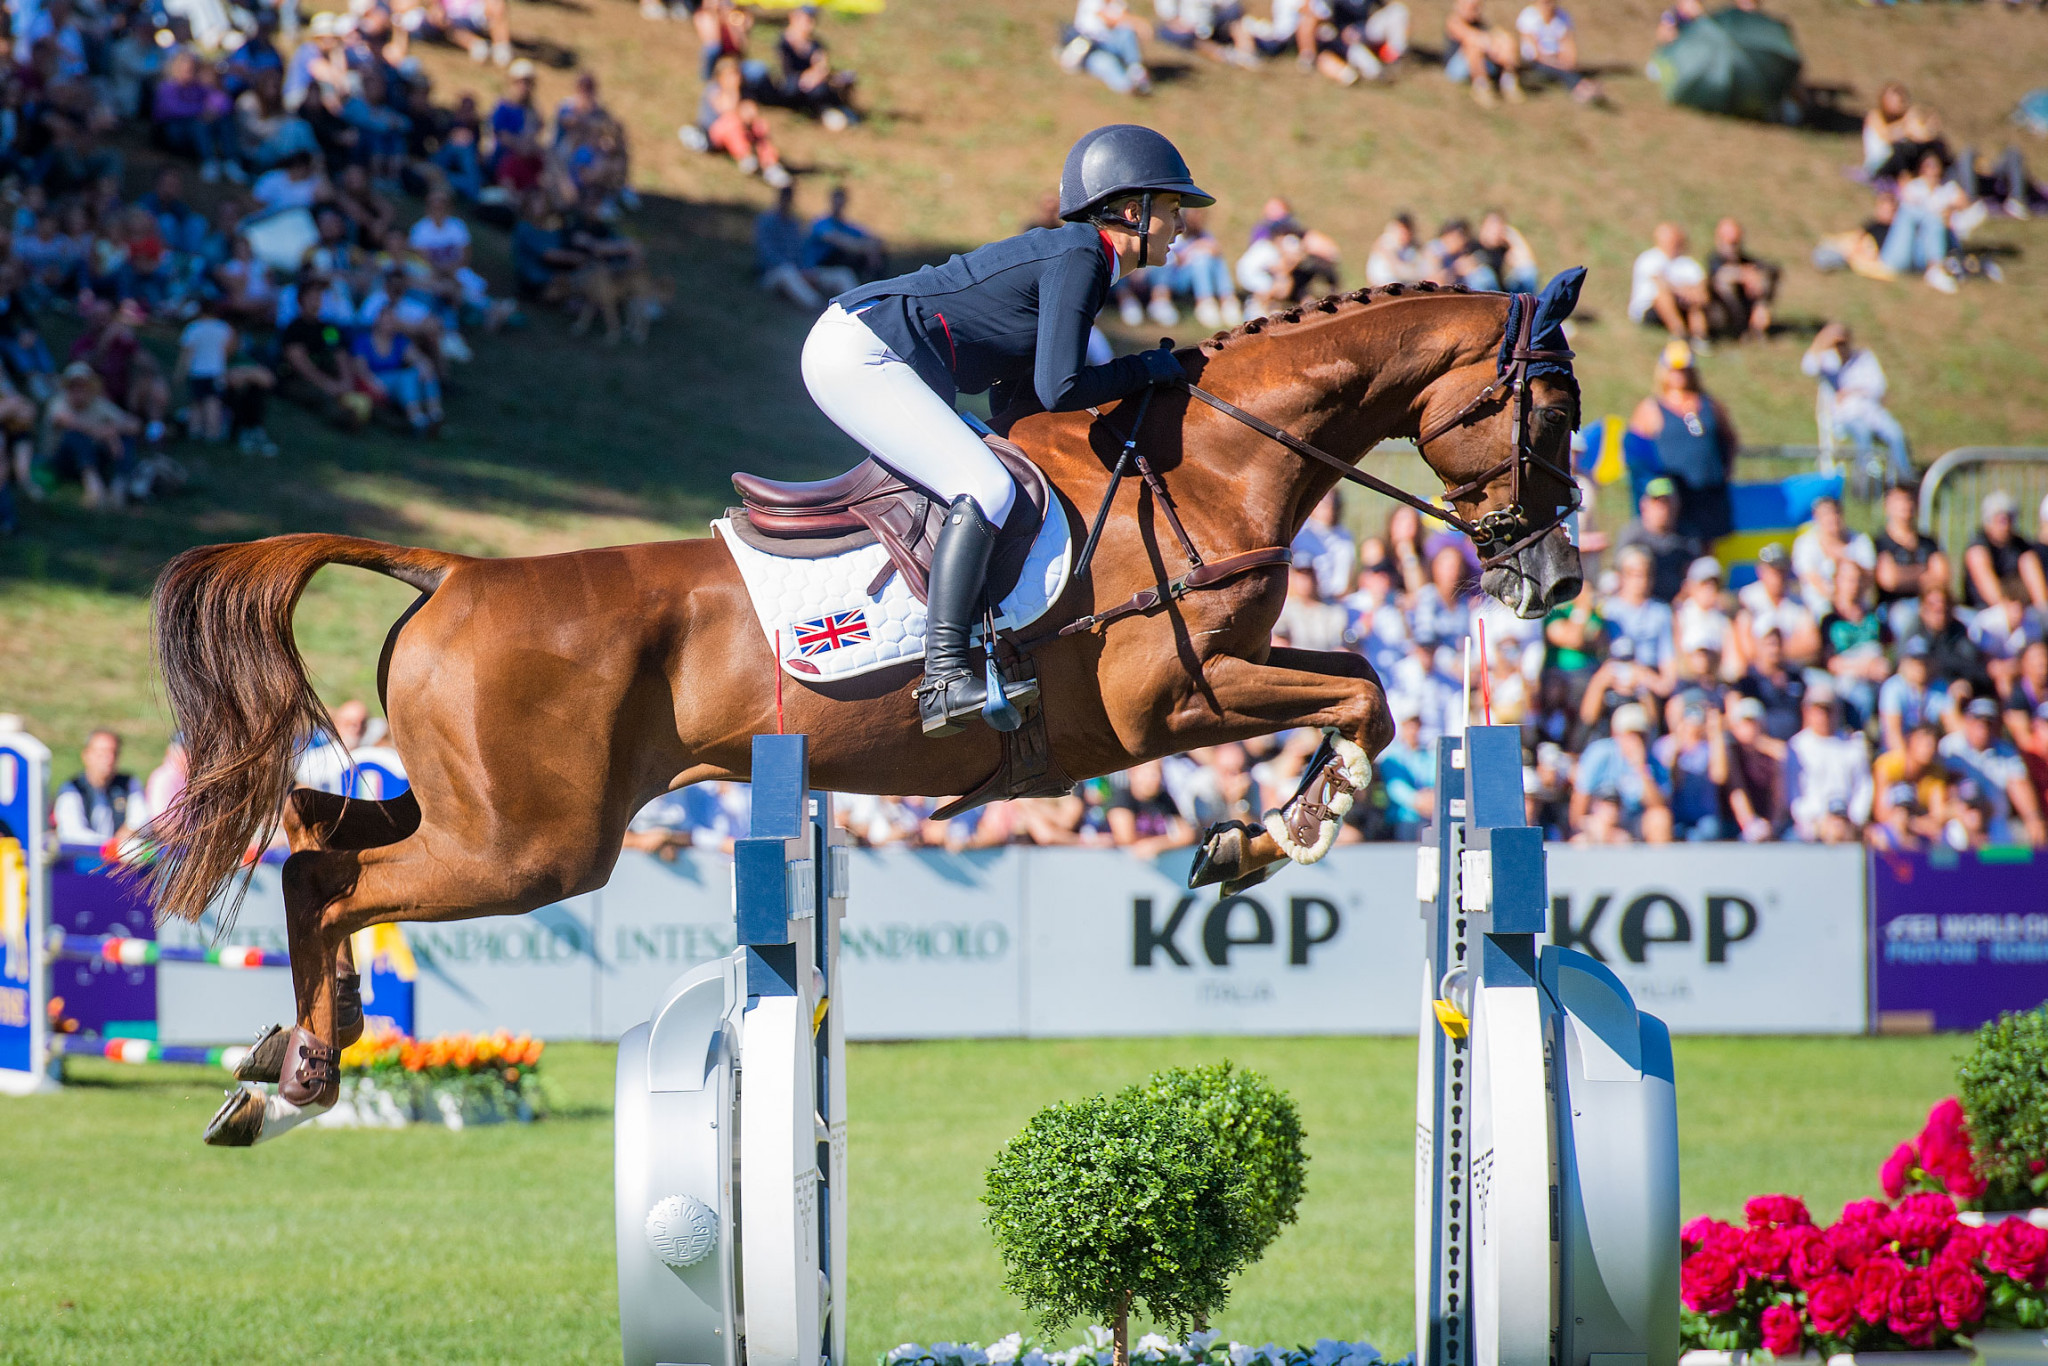 Ingham takes gold at Eventing World Championships after Jung capitulation